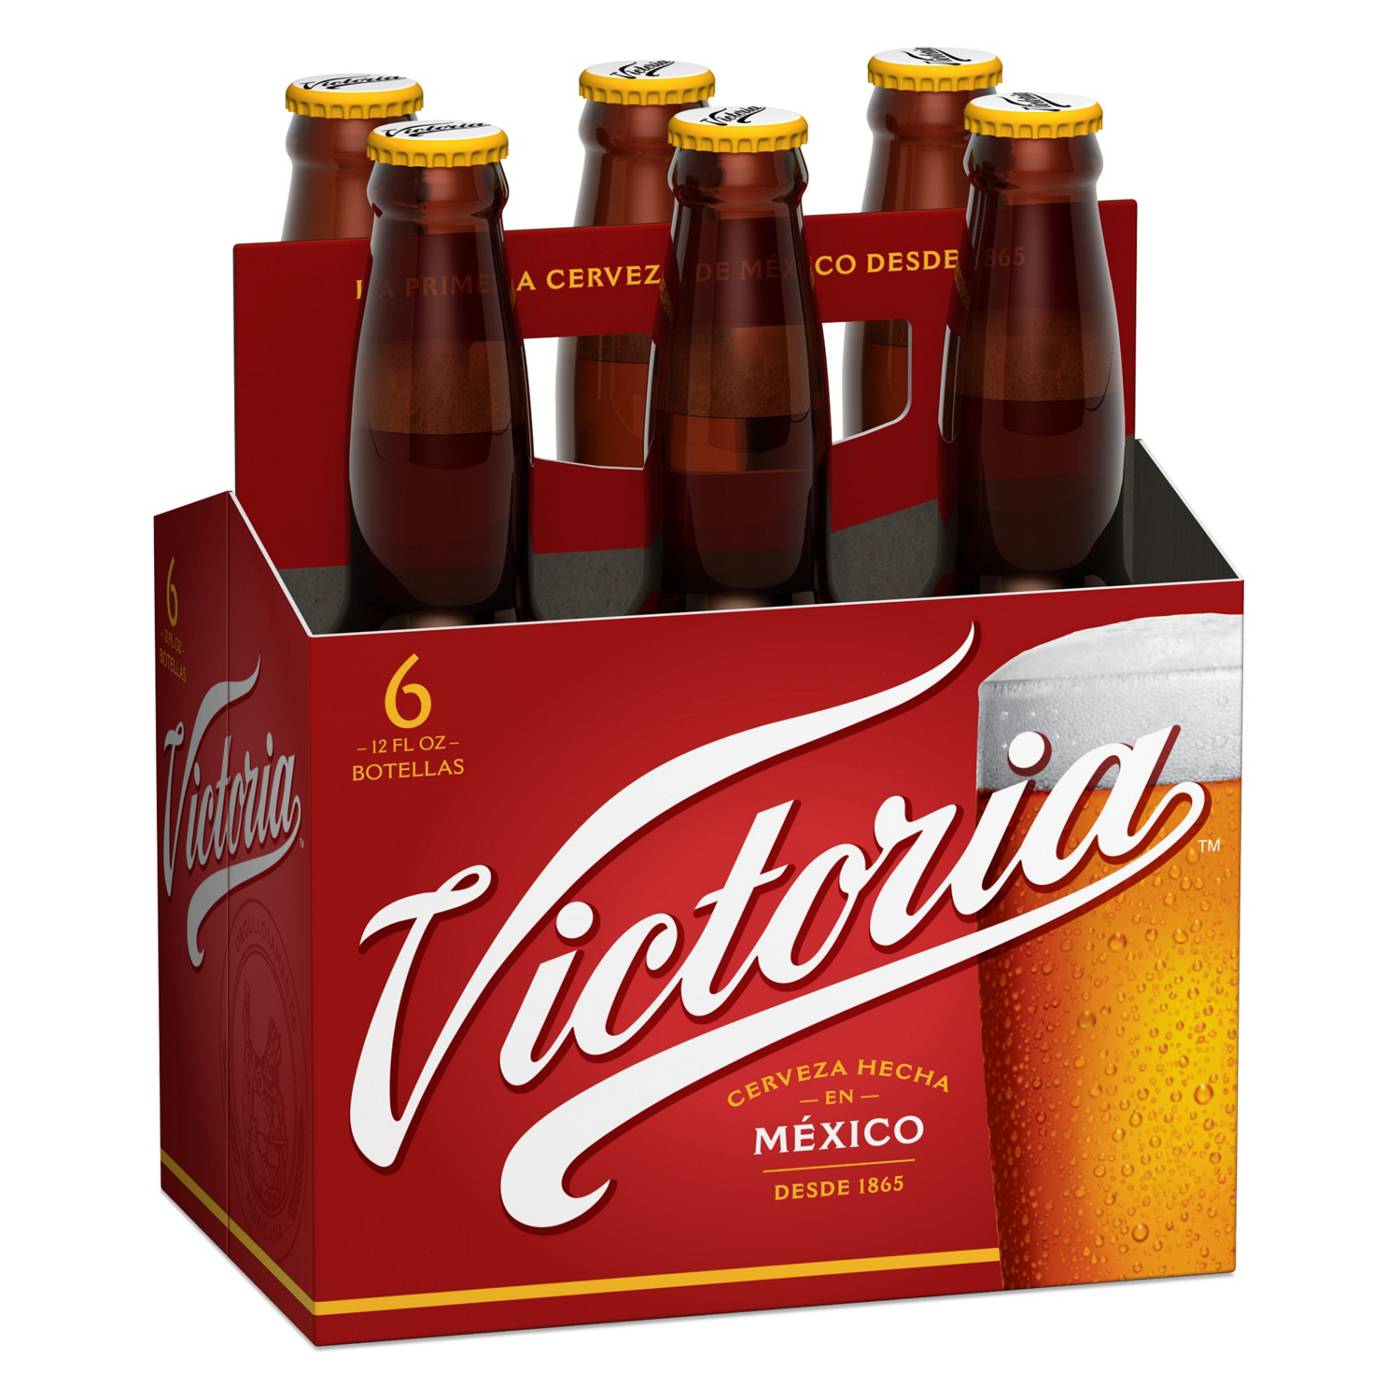 Victoria Amber Lager Mexican Beer 12 oz Bottles, 6 pk; image 1 of 8